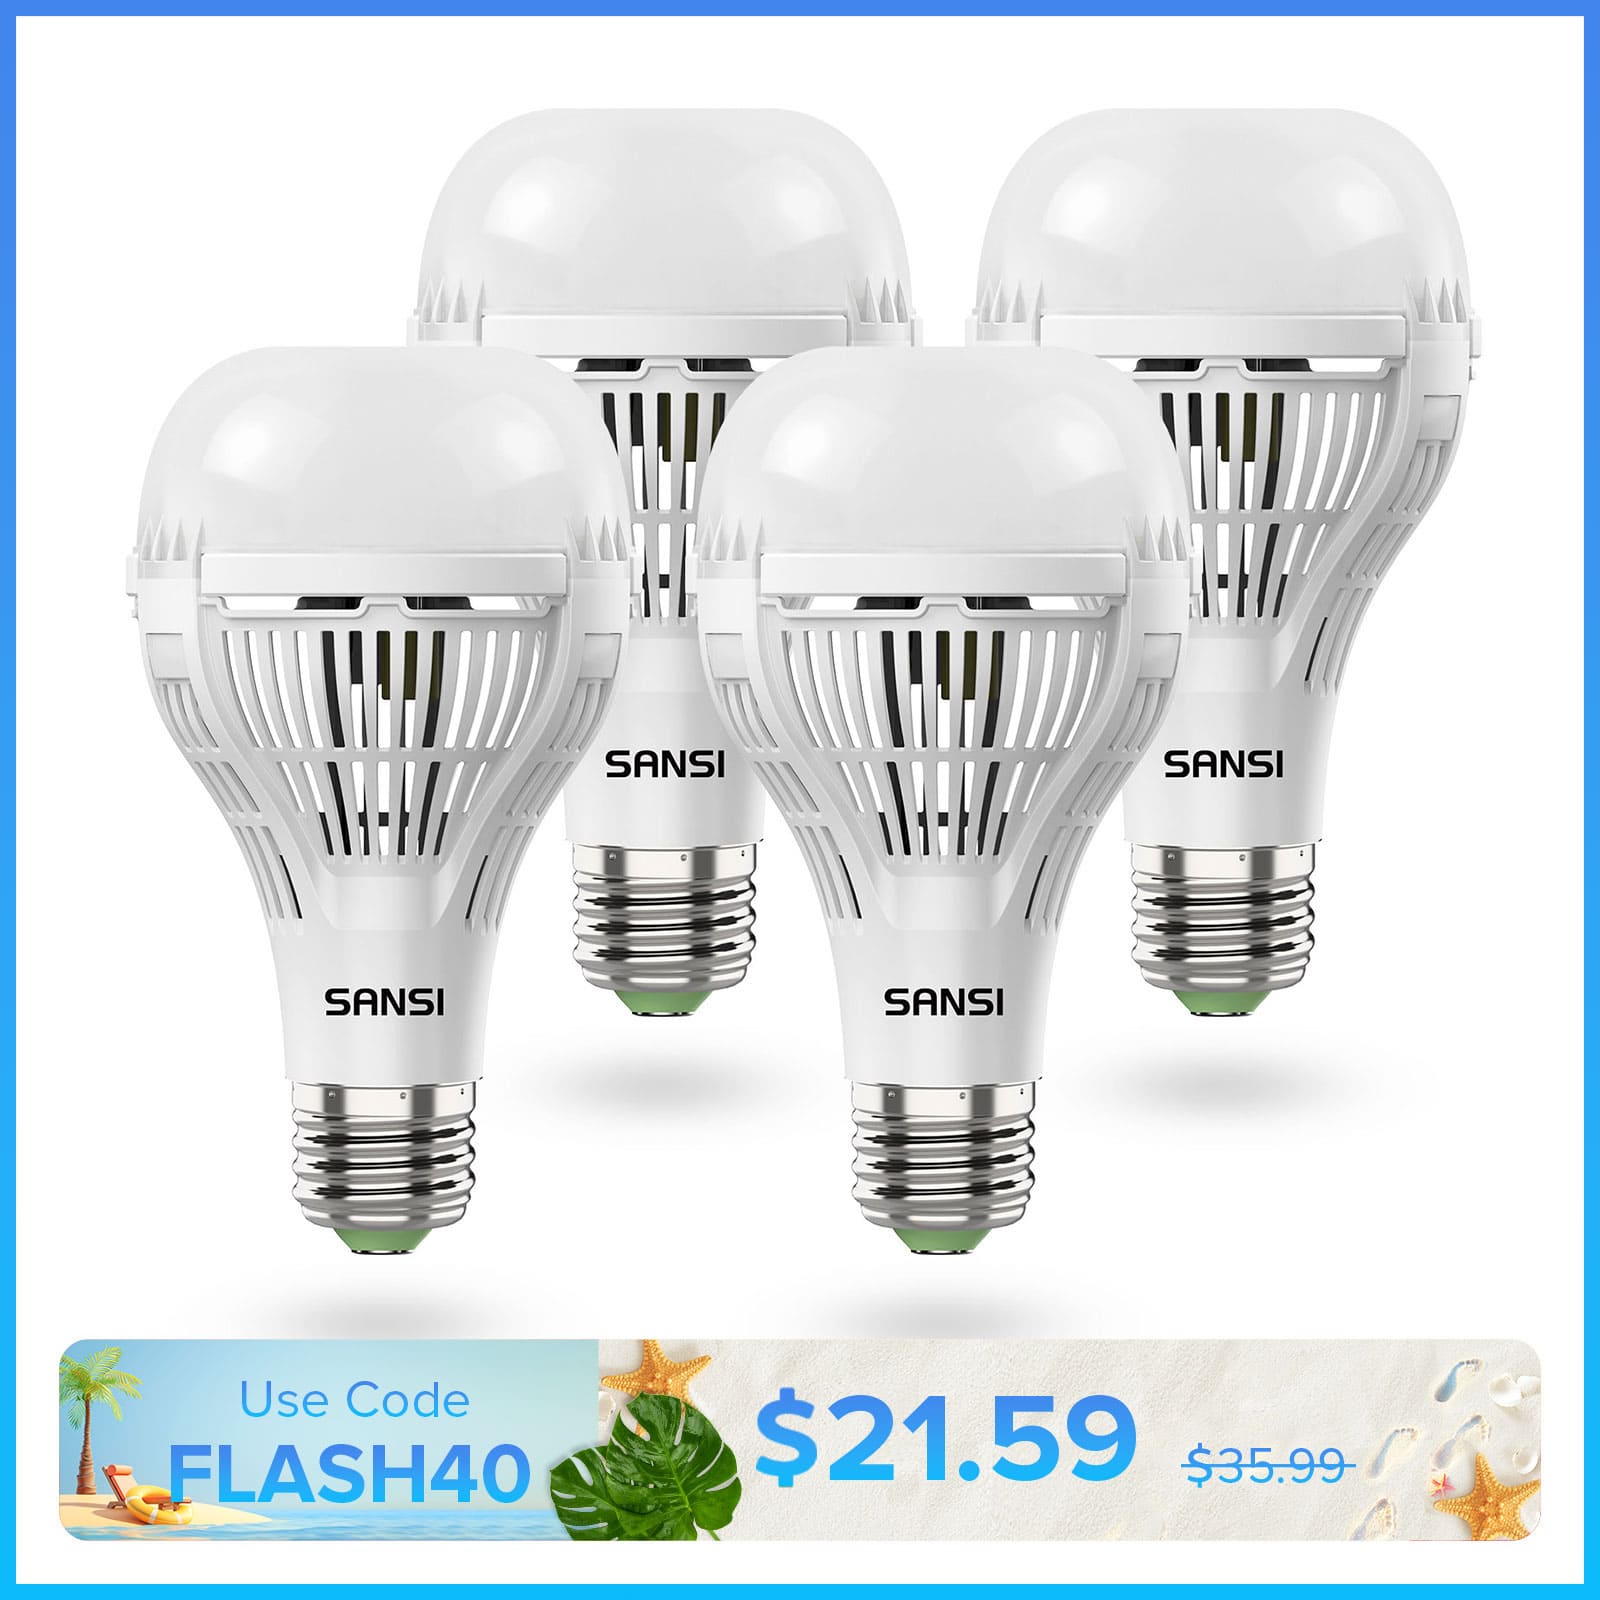 Upgraded A21 18W LED Light Bulb (US ONLY)